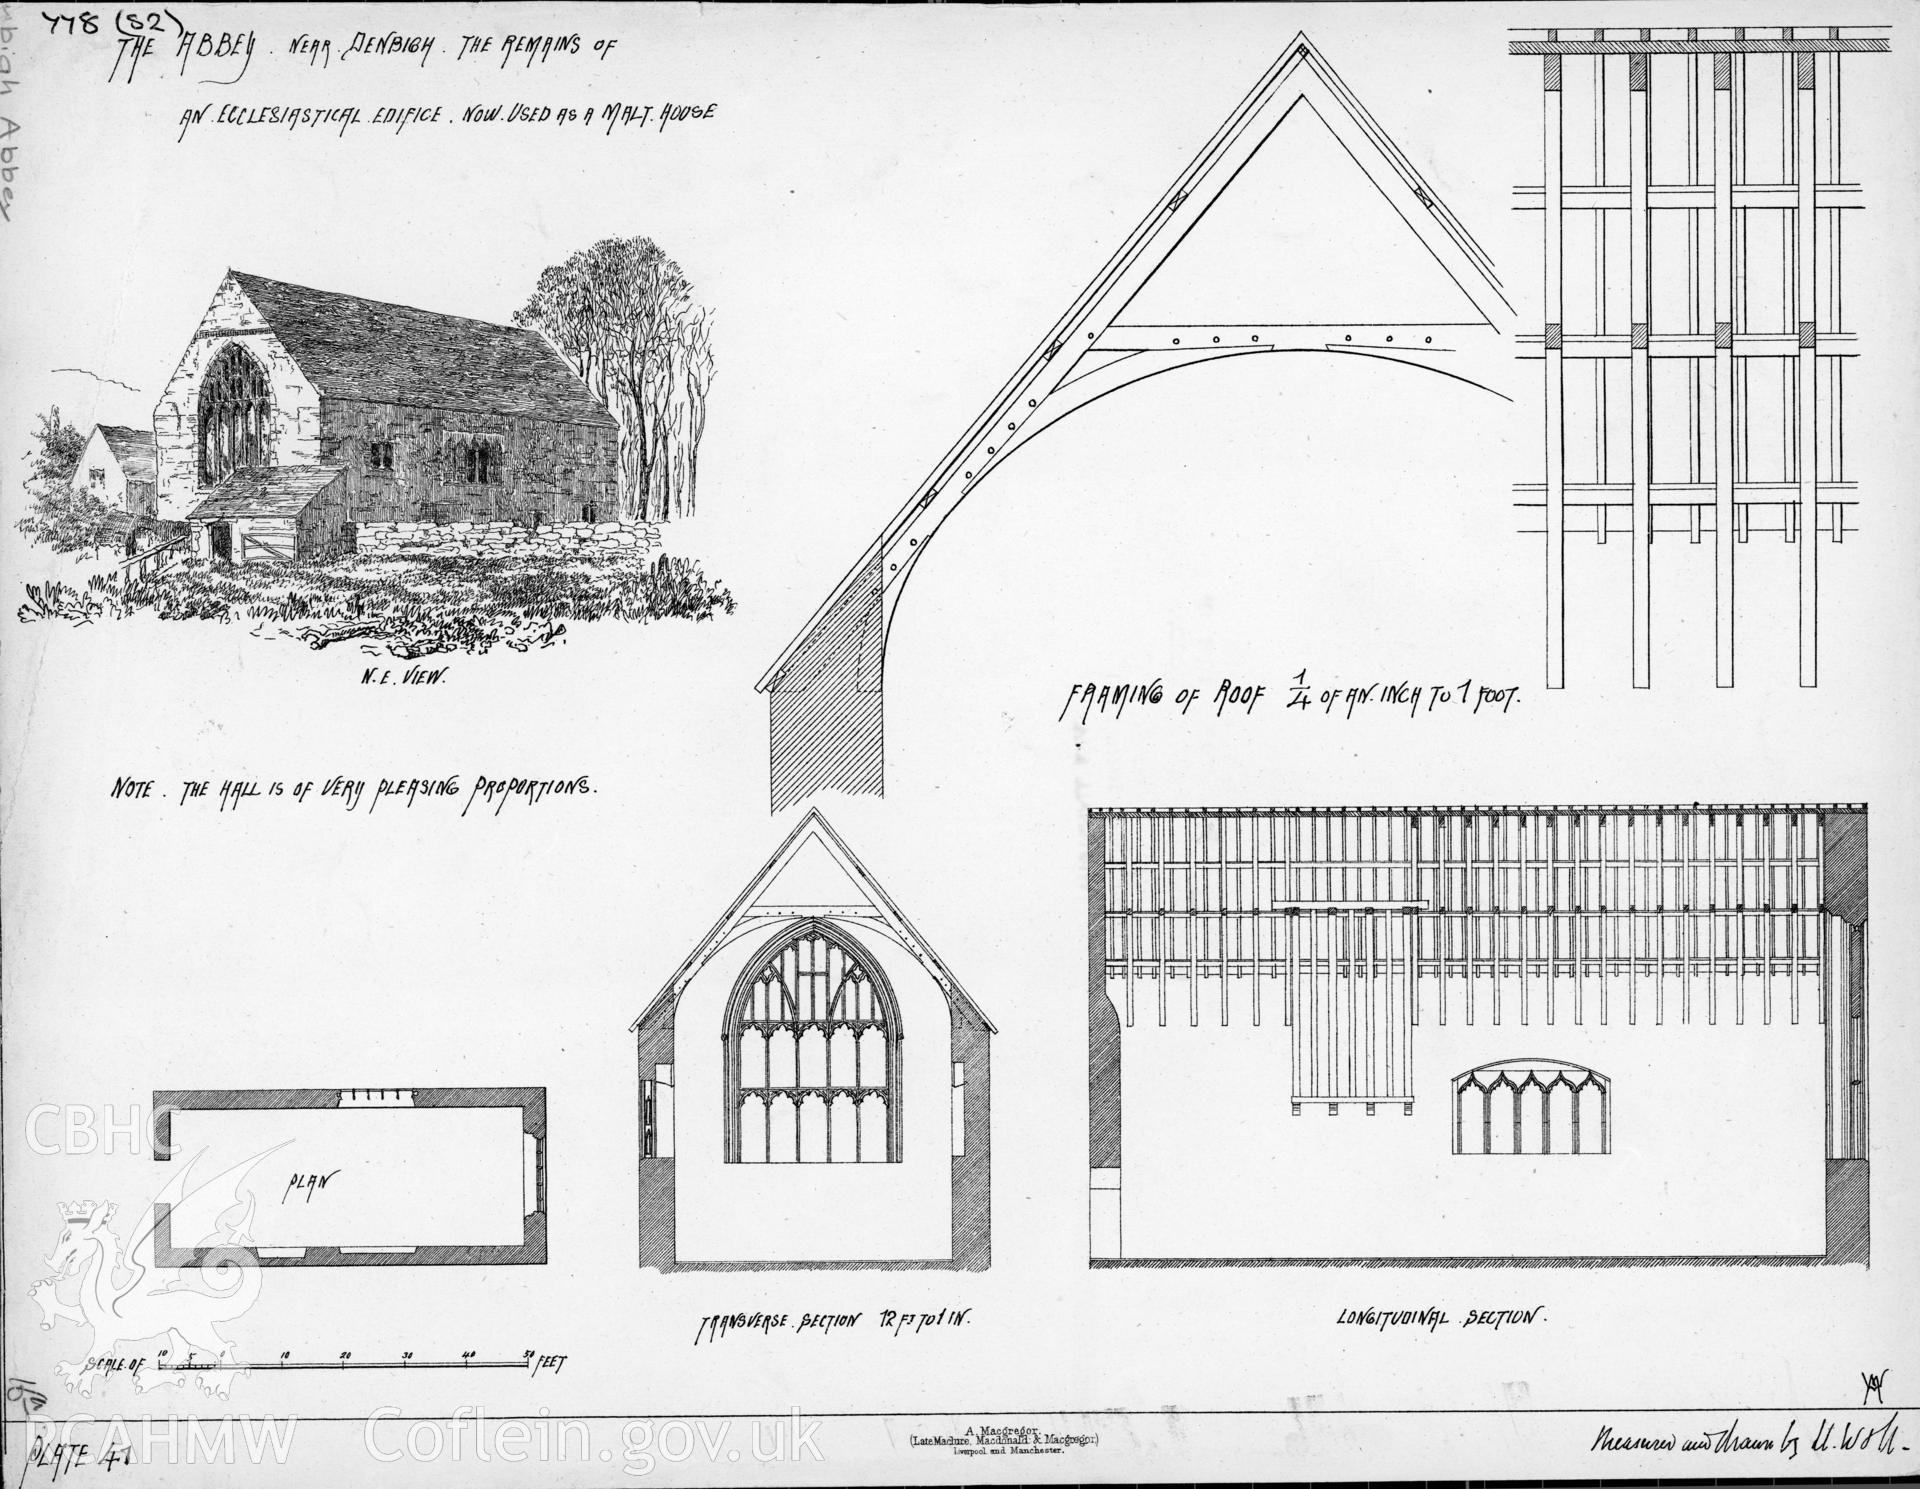 Copy of a non RCAHMW drawing showing plan and section of White Friary, Denbigh.